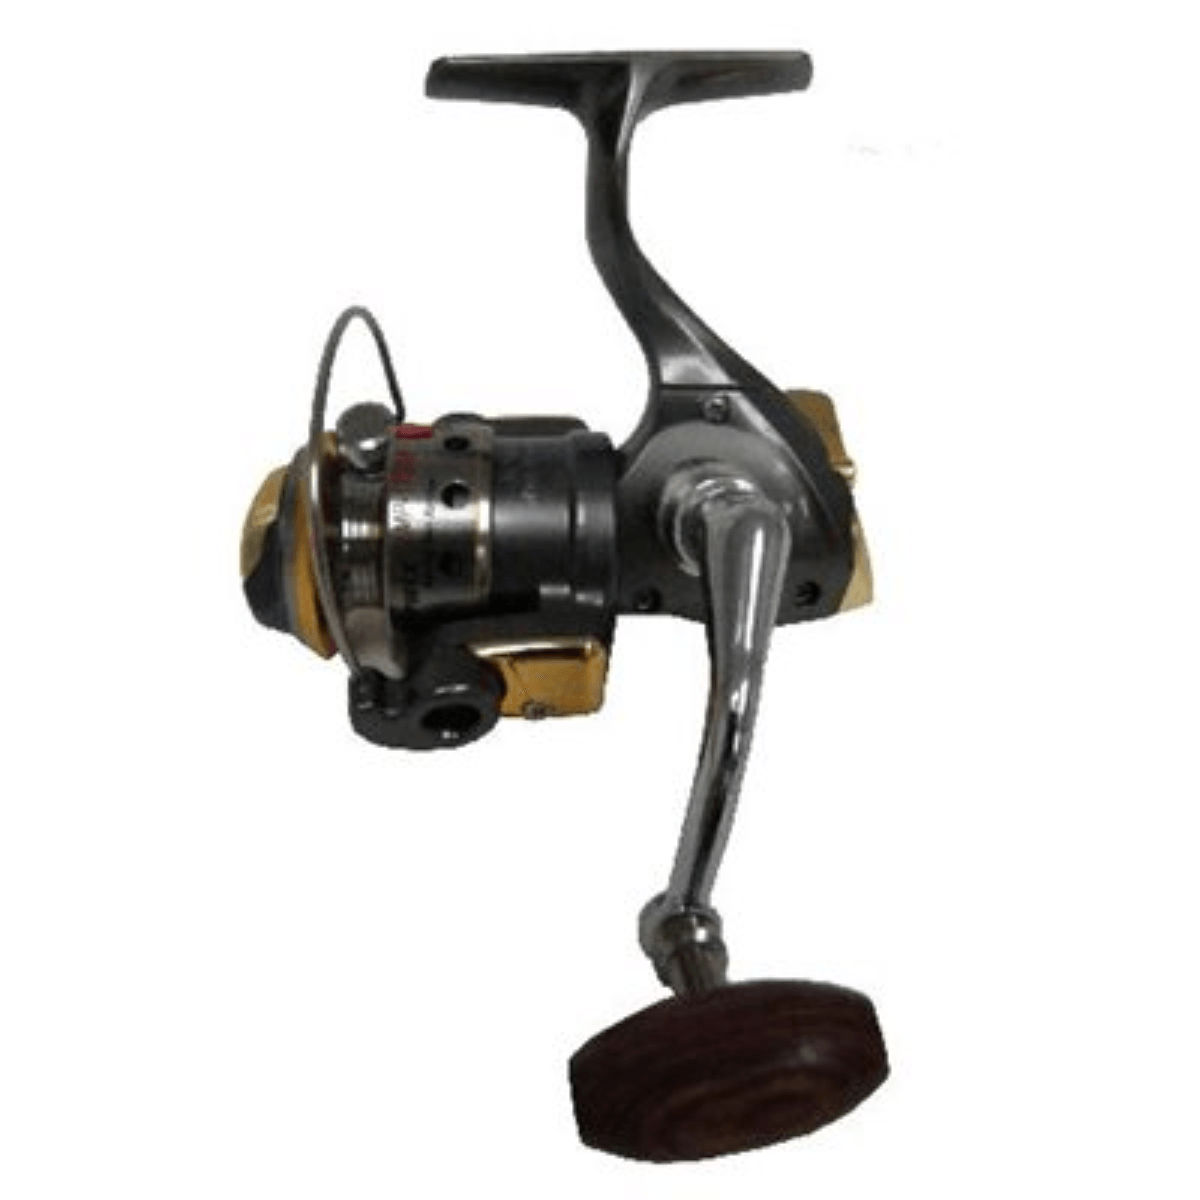 Automatic Ice Fishing Hook Setter and Rod Holder